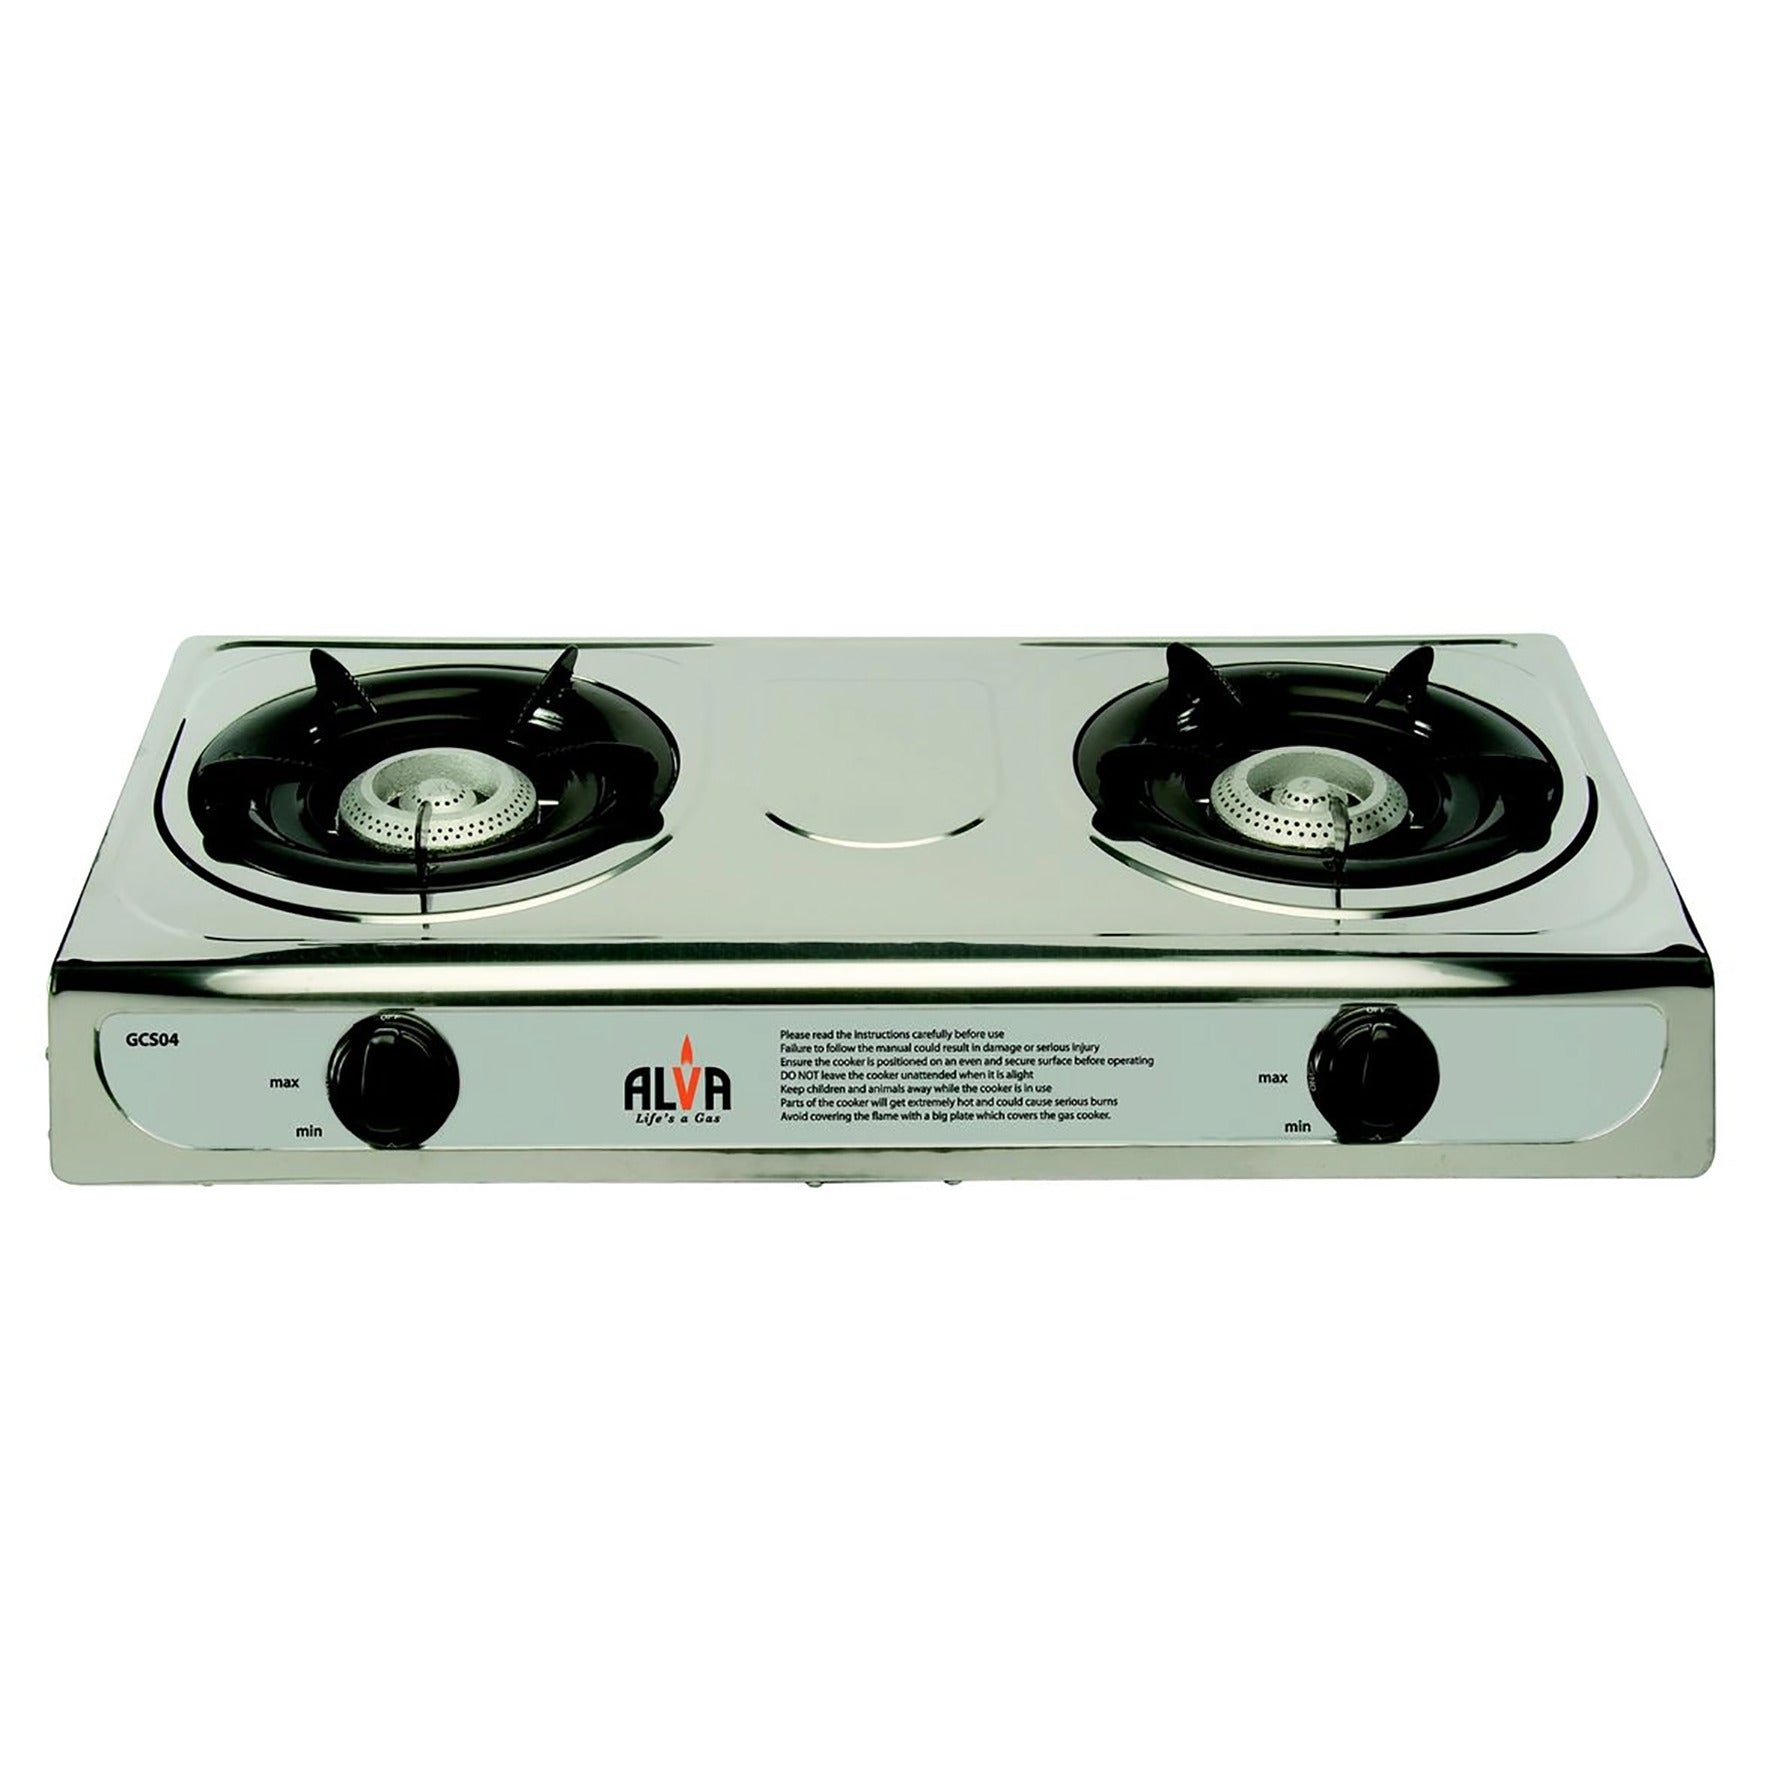 Alva Automatic Gas Cooker Stainless Steel GCS04